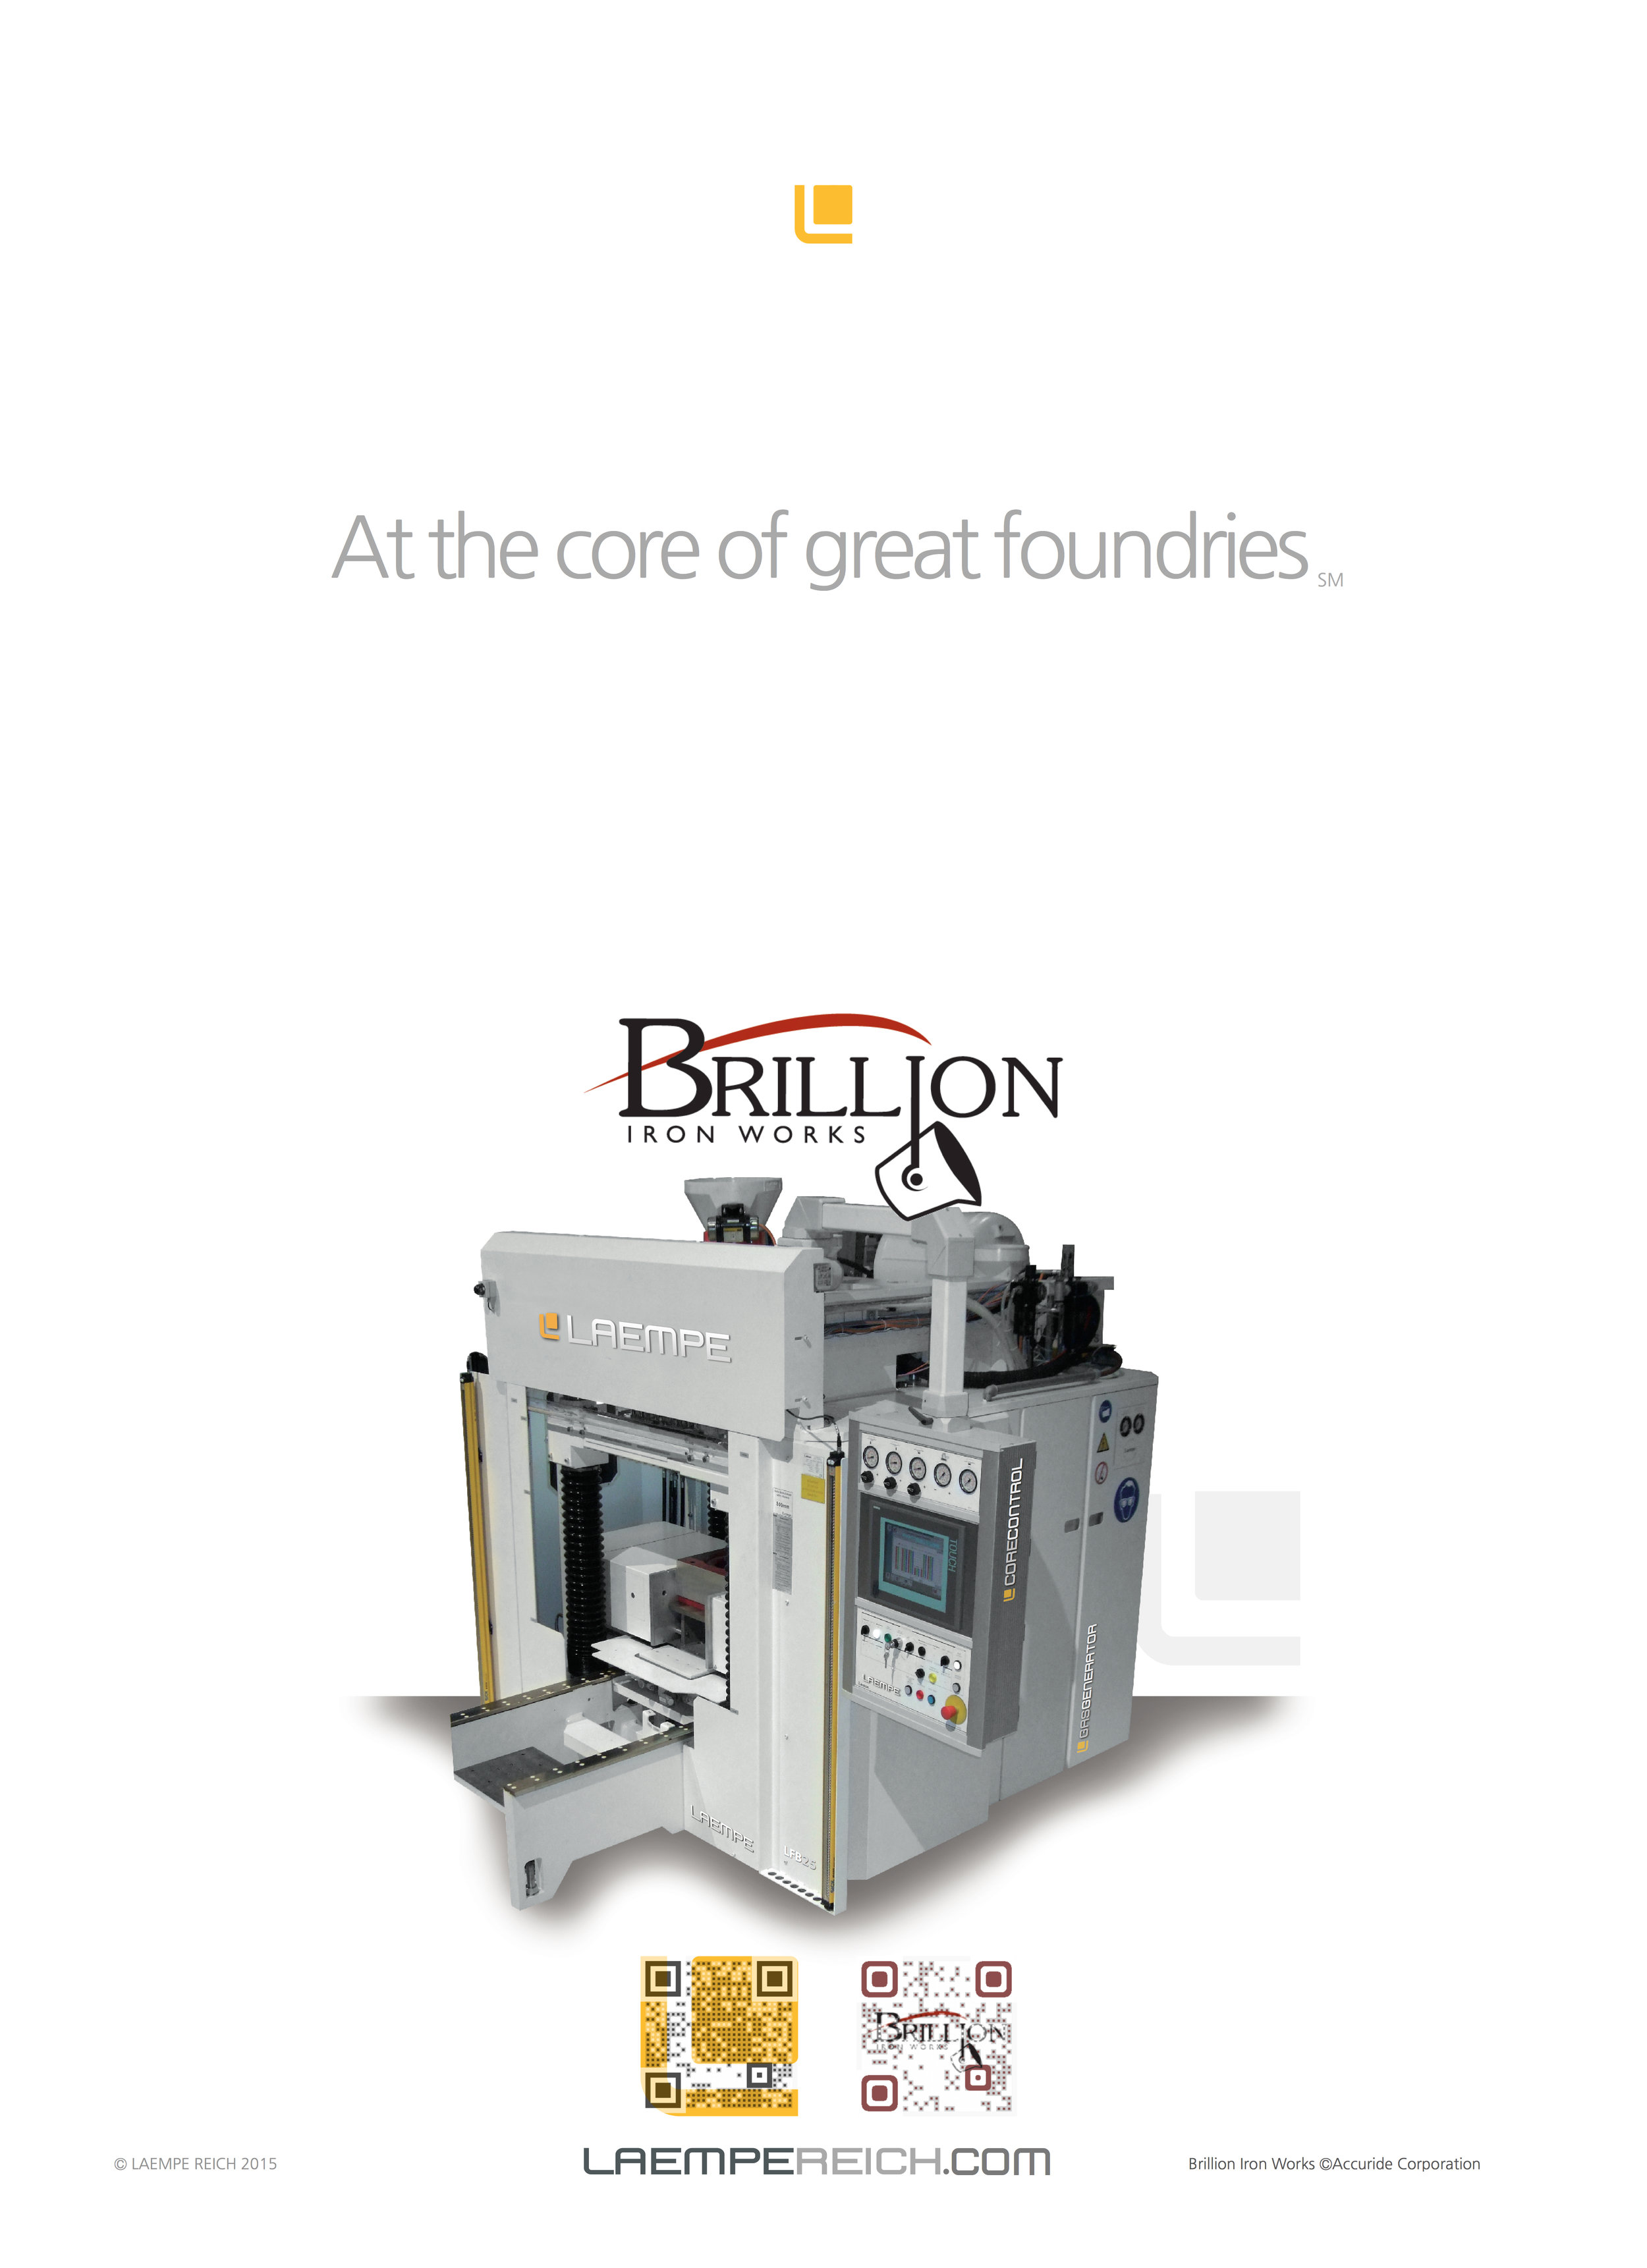 Brillion - At the Core of Great Foundries 2015.jpg